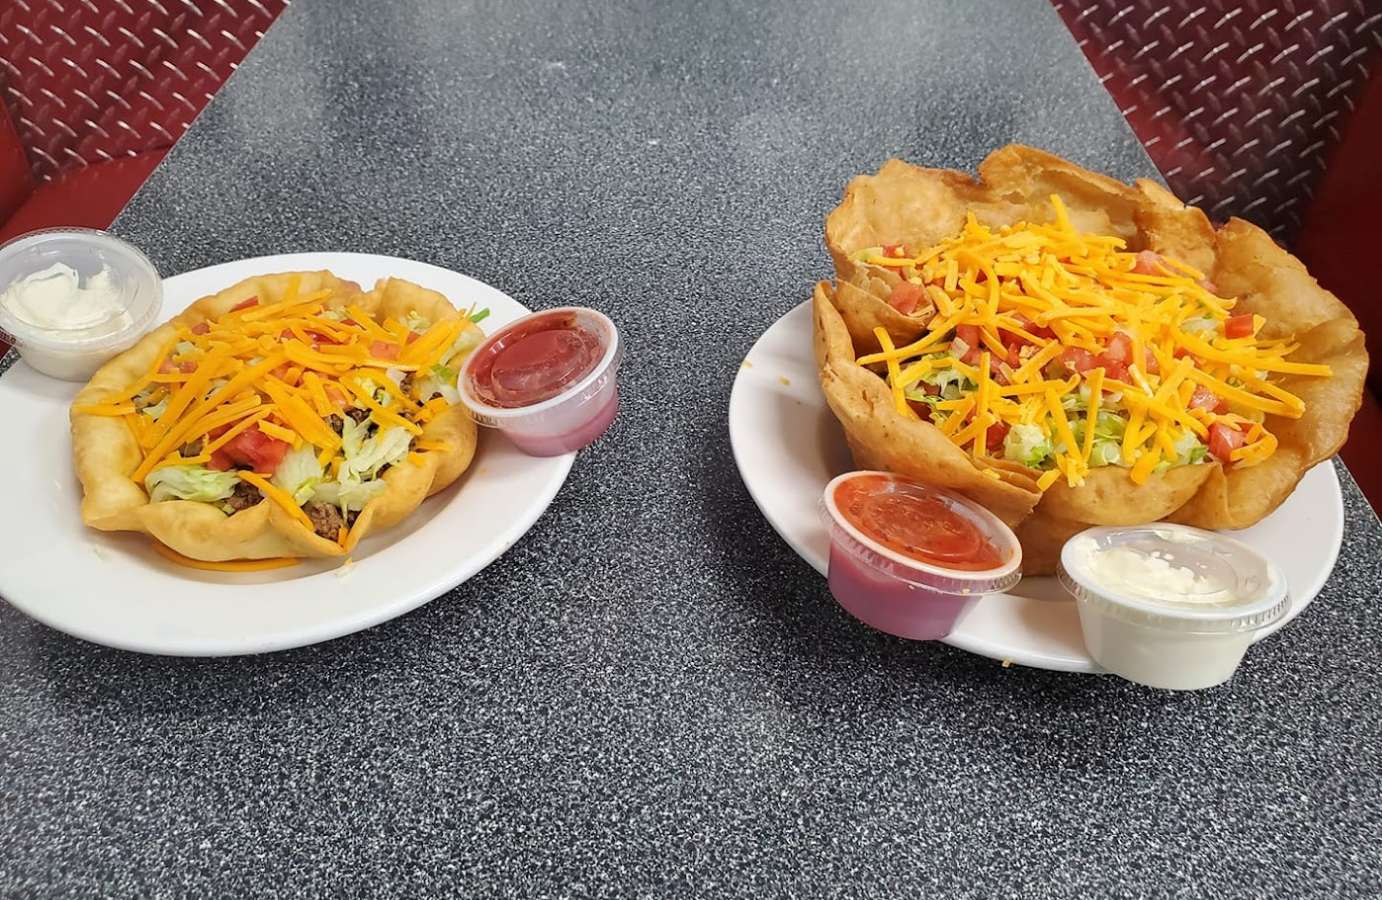 Two plates of tacos with sauces on a table